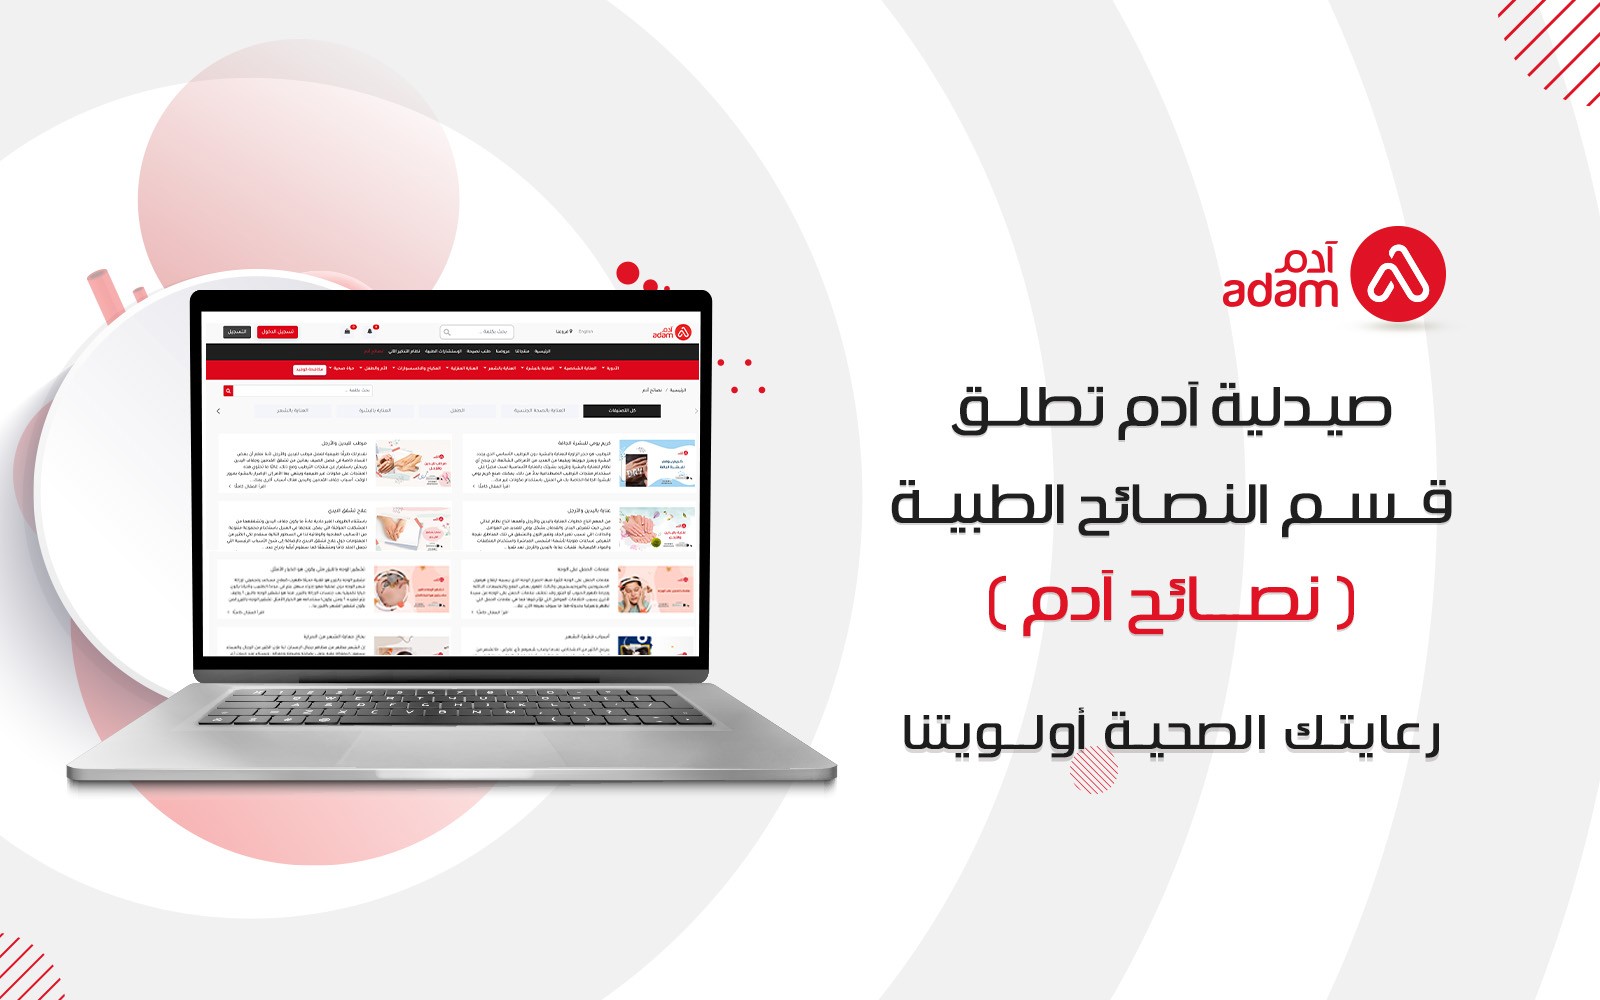 Adamonline.com Launching  the medical advice section